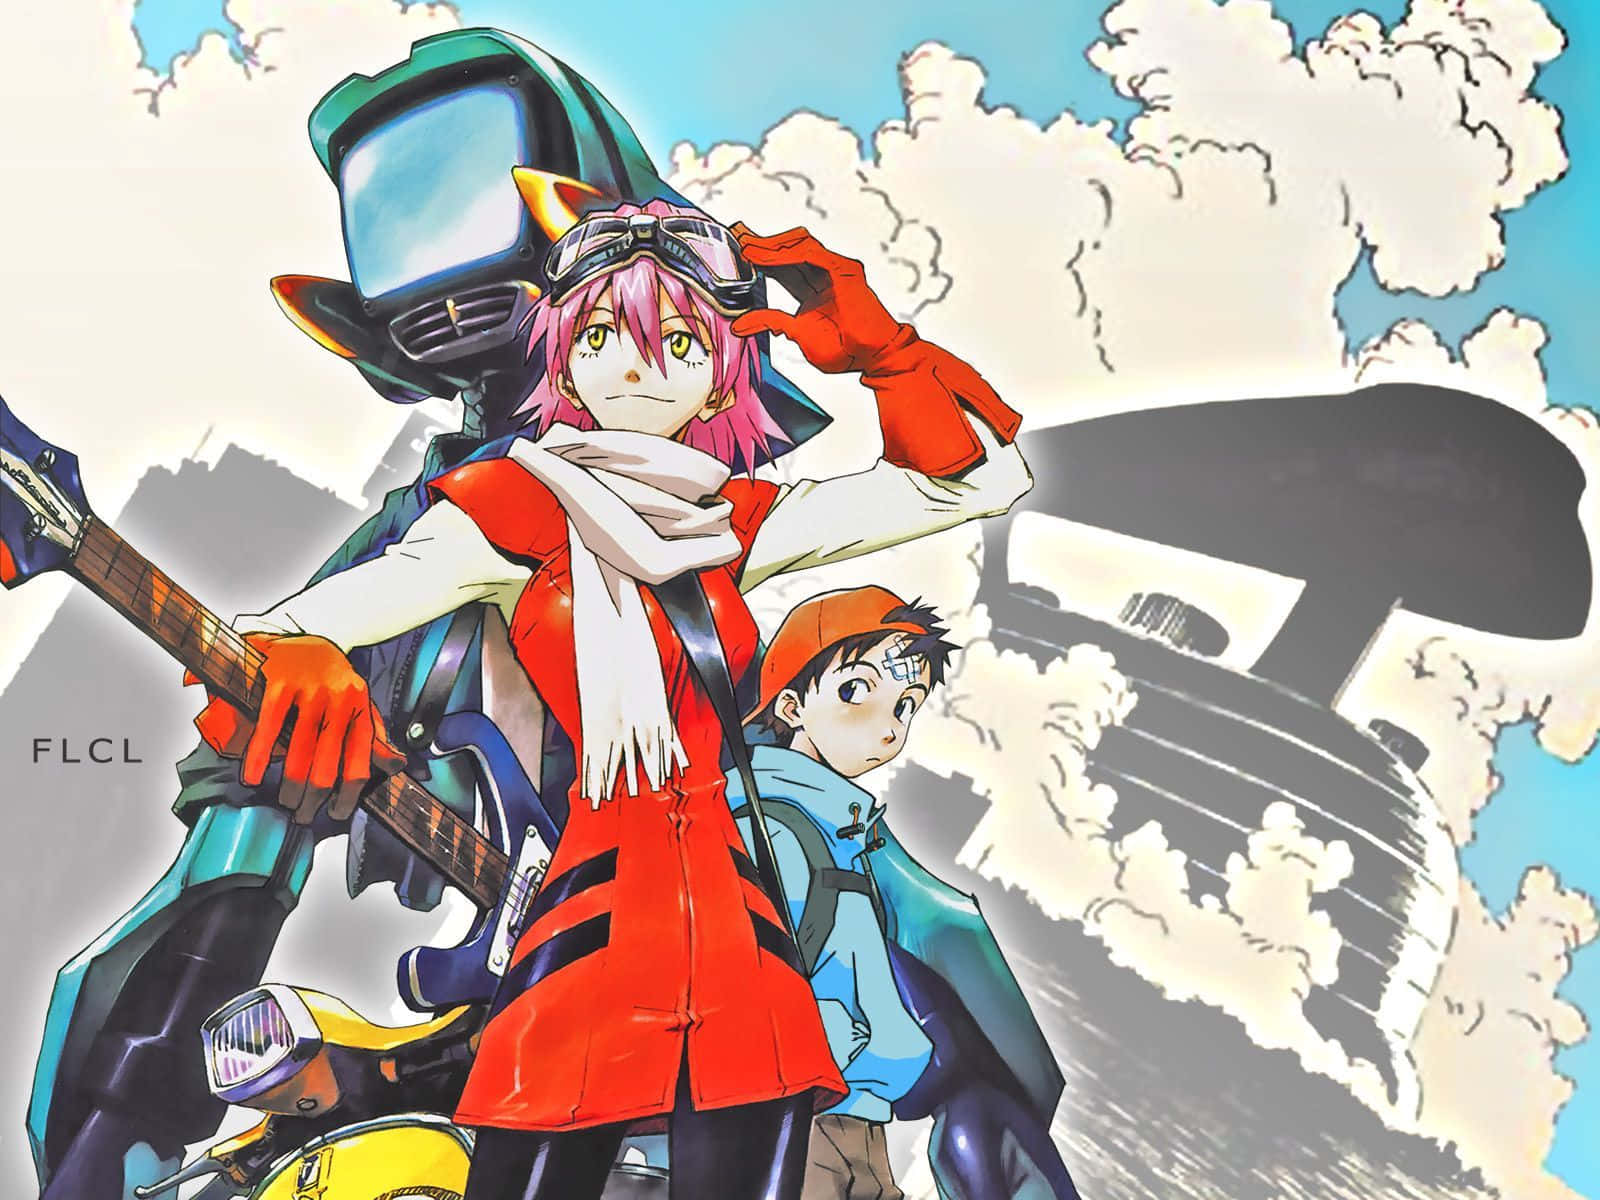 Enjoying the uniqueness of the world in FLCL